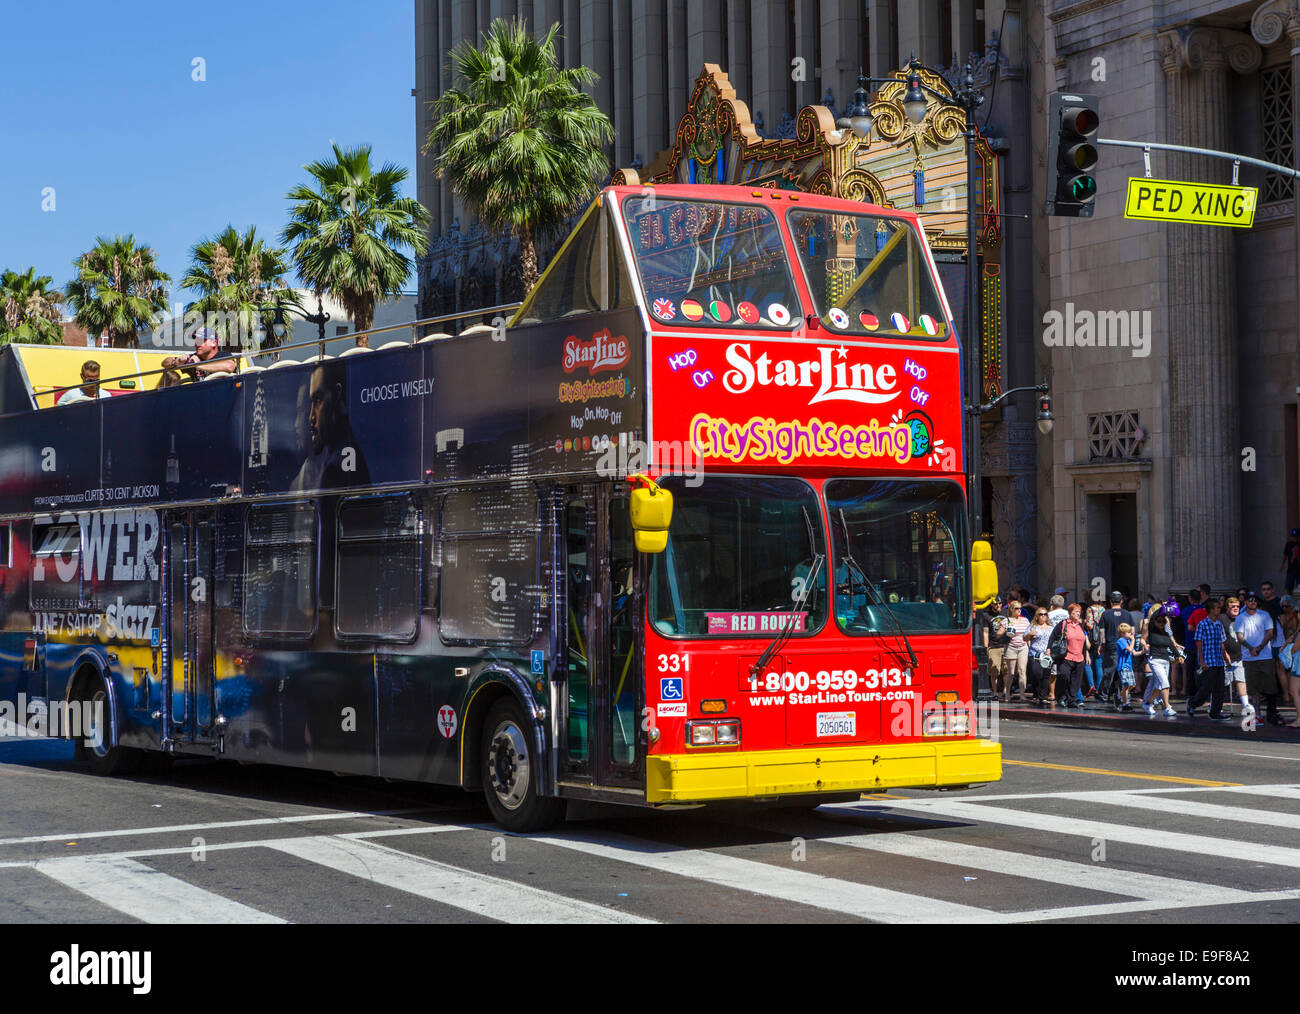 Starline Tours double-decker sightseeing bus on Hollywood Boulevard, Hollywood, Los Angeles, California, USA Stock Photo